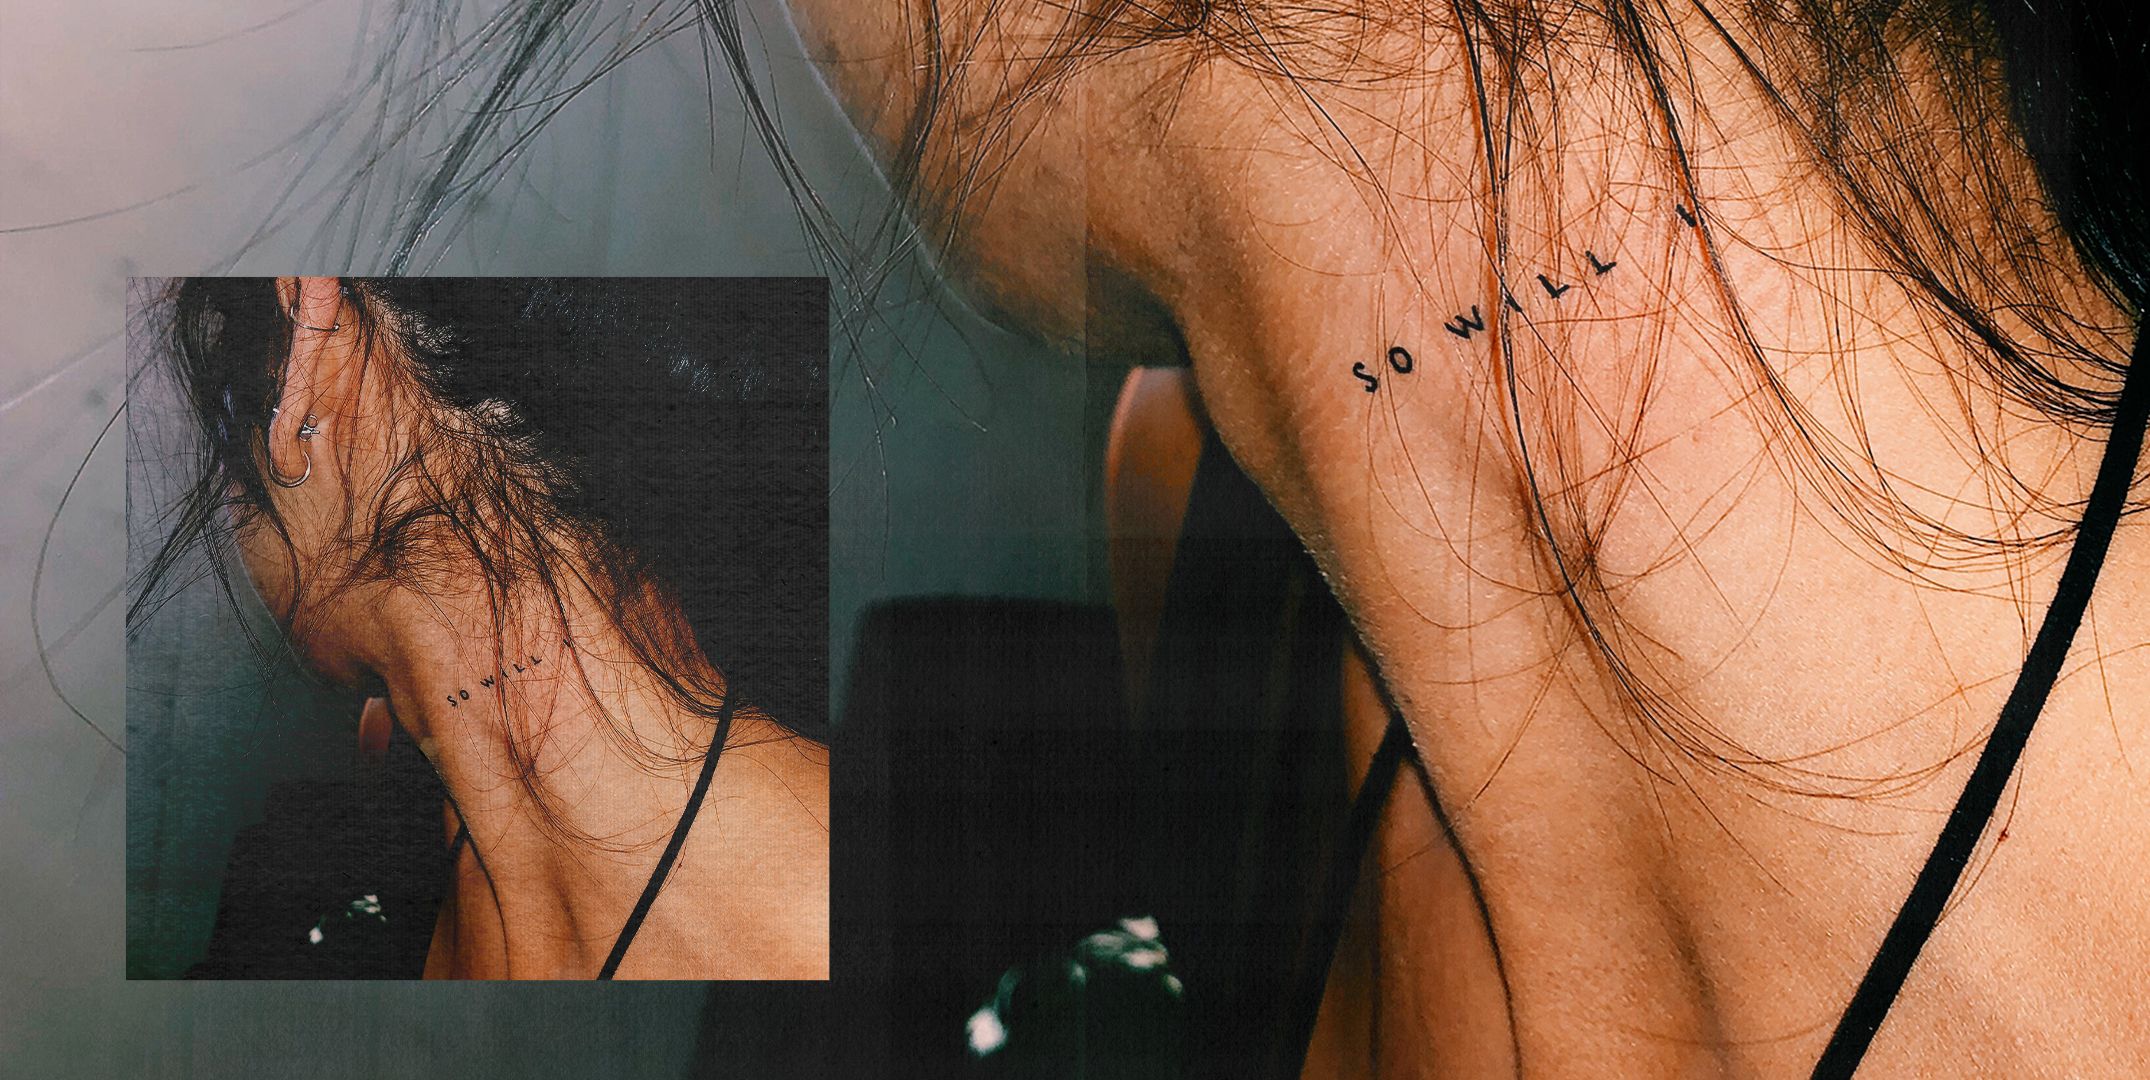 45 small tattoos for women thatll make you want to get a tattoo